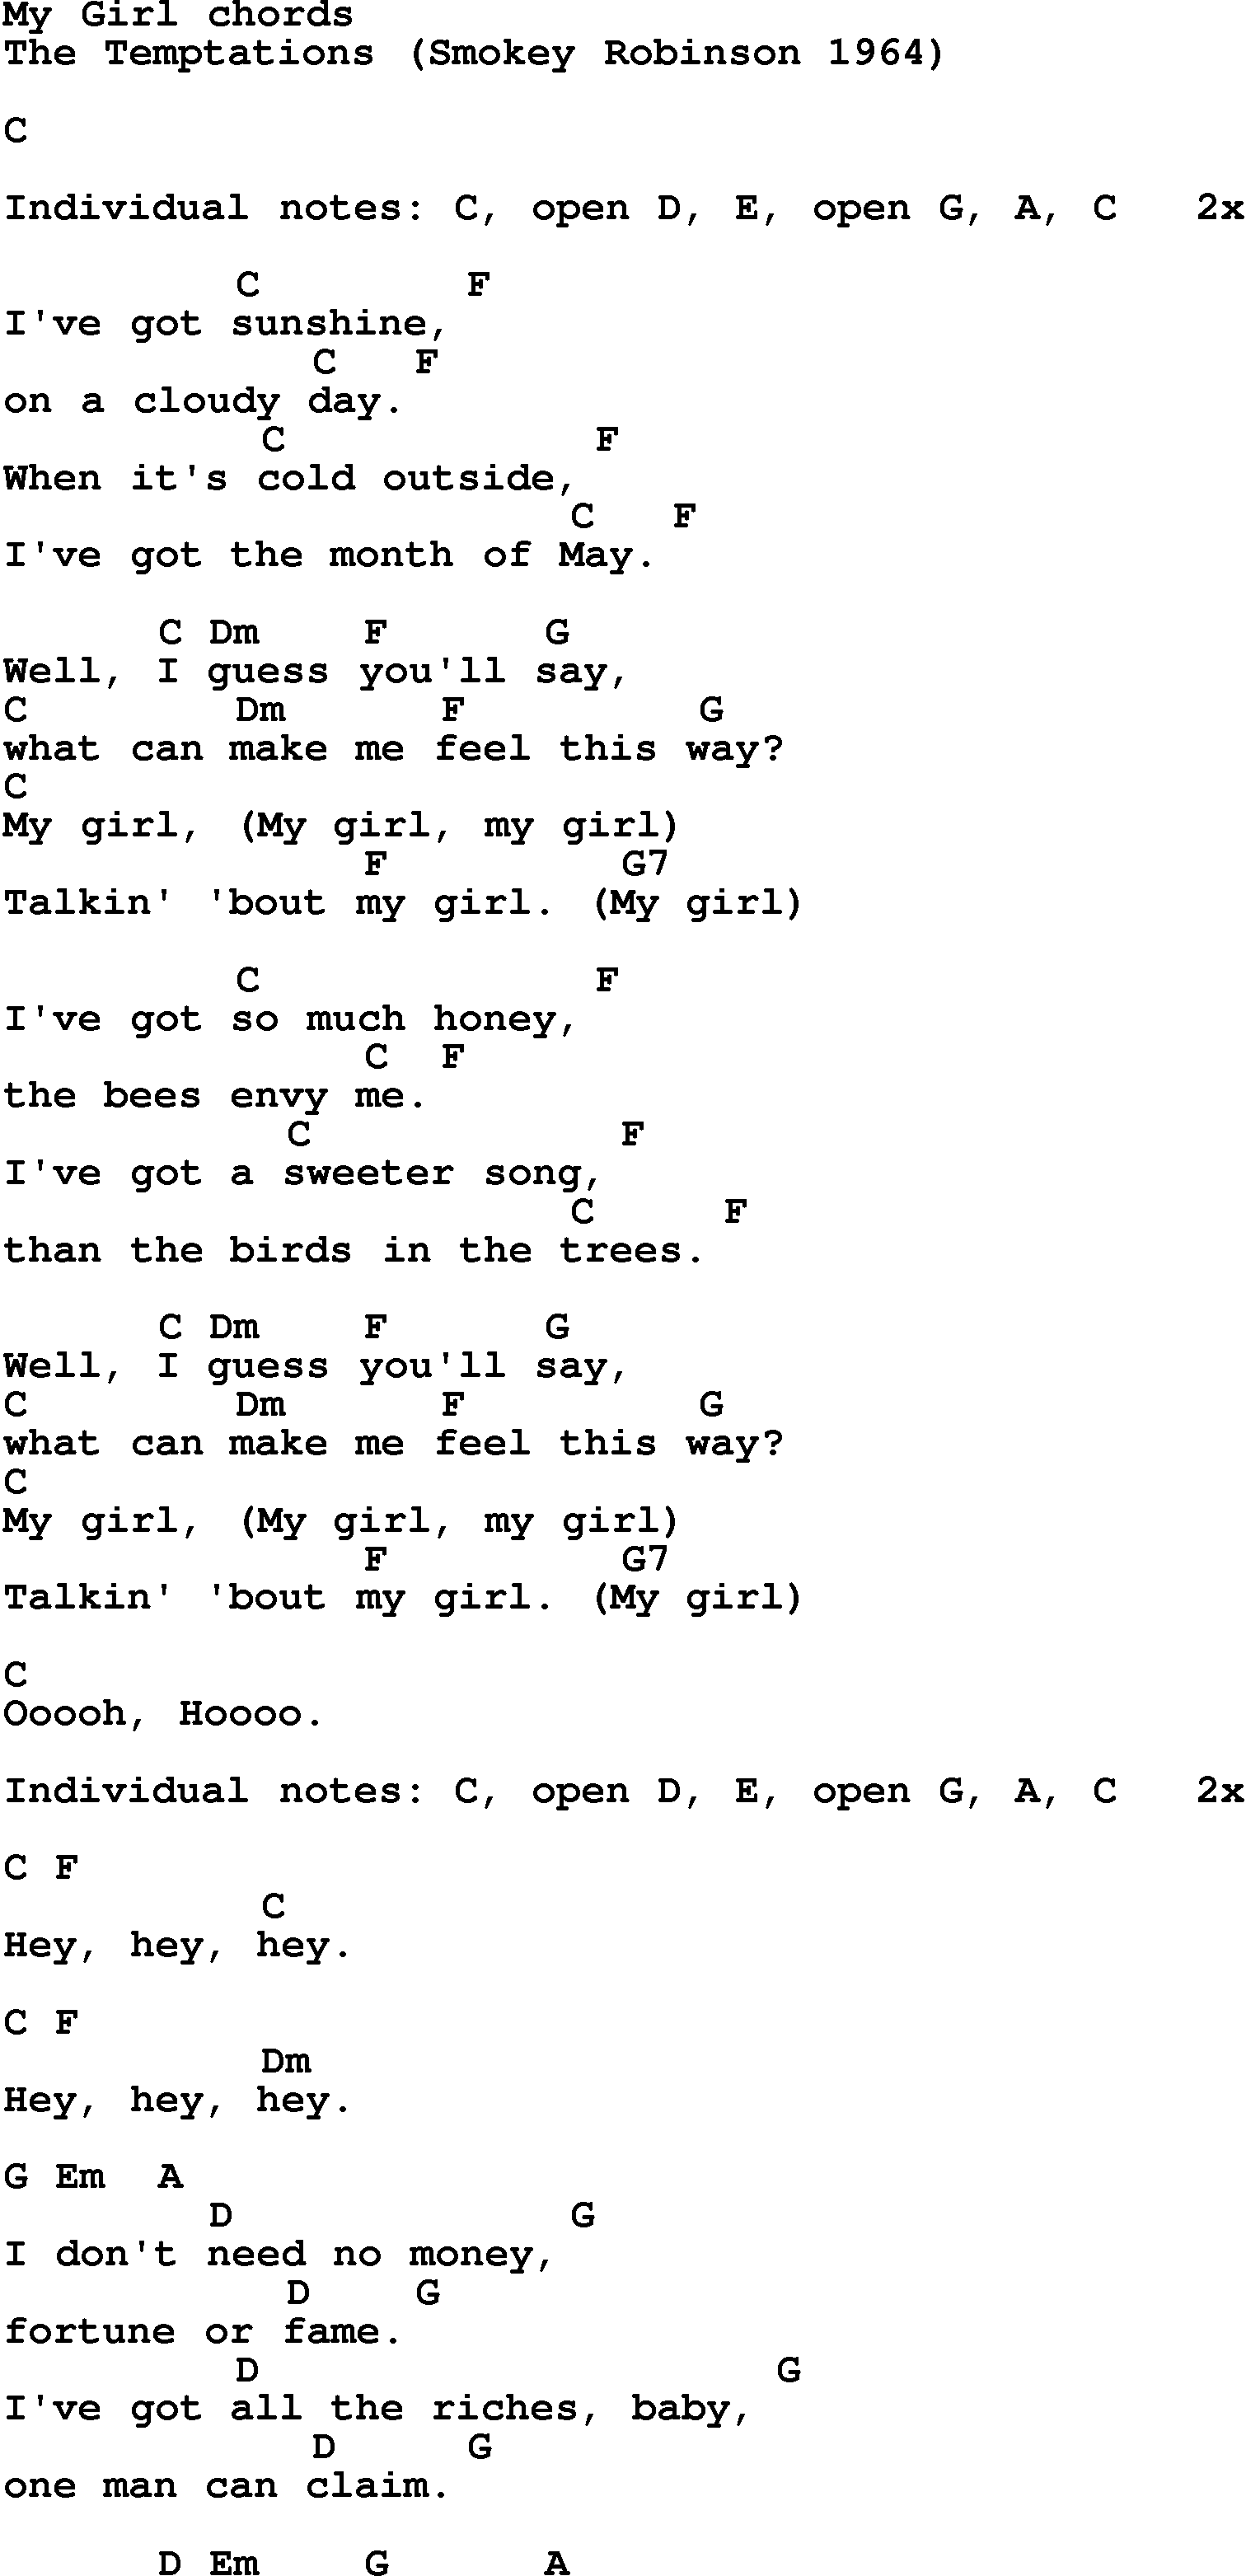 Lyrics song with my girl Cover versions